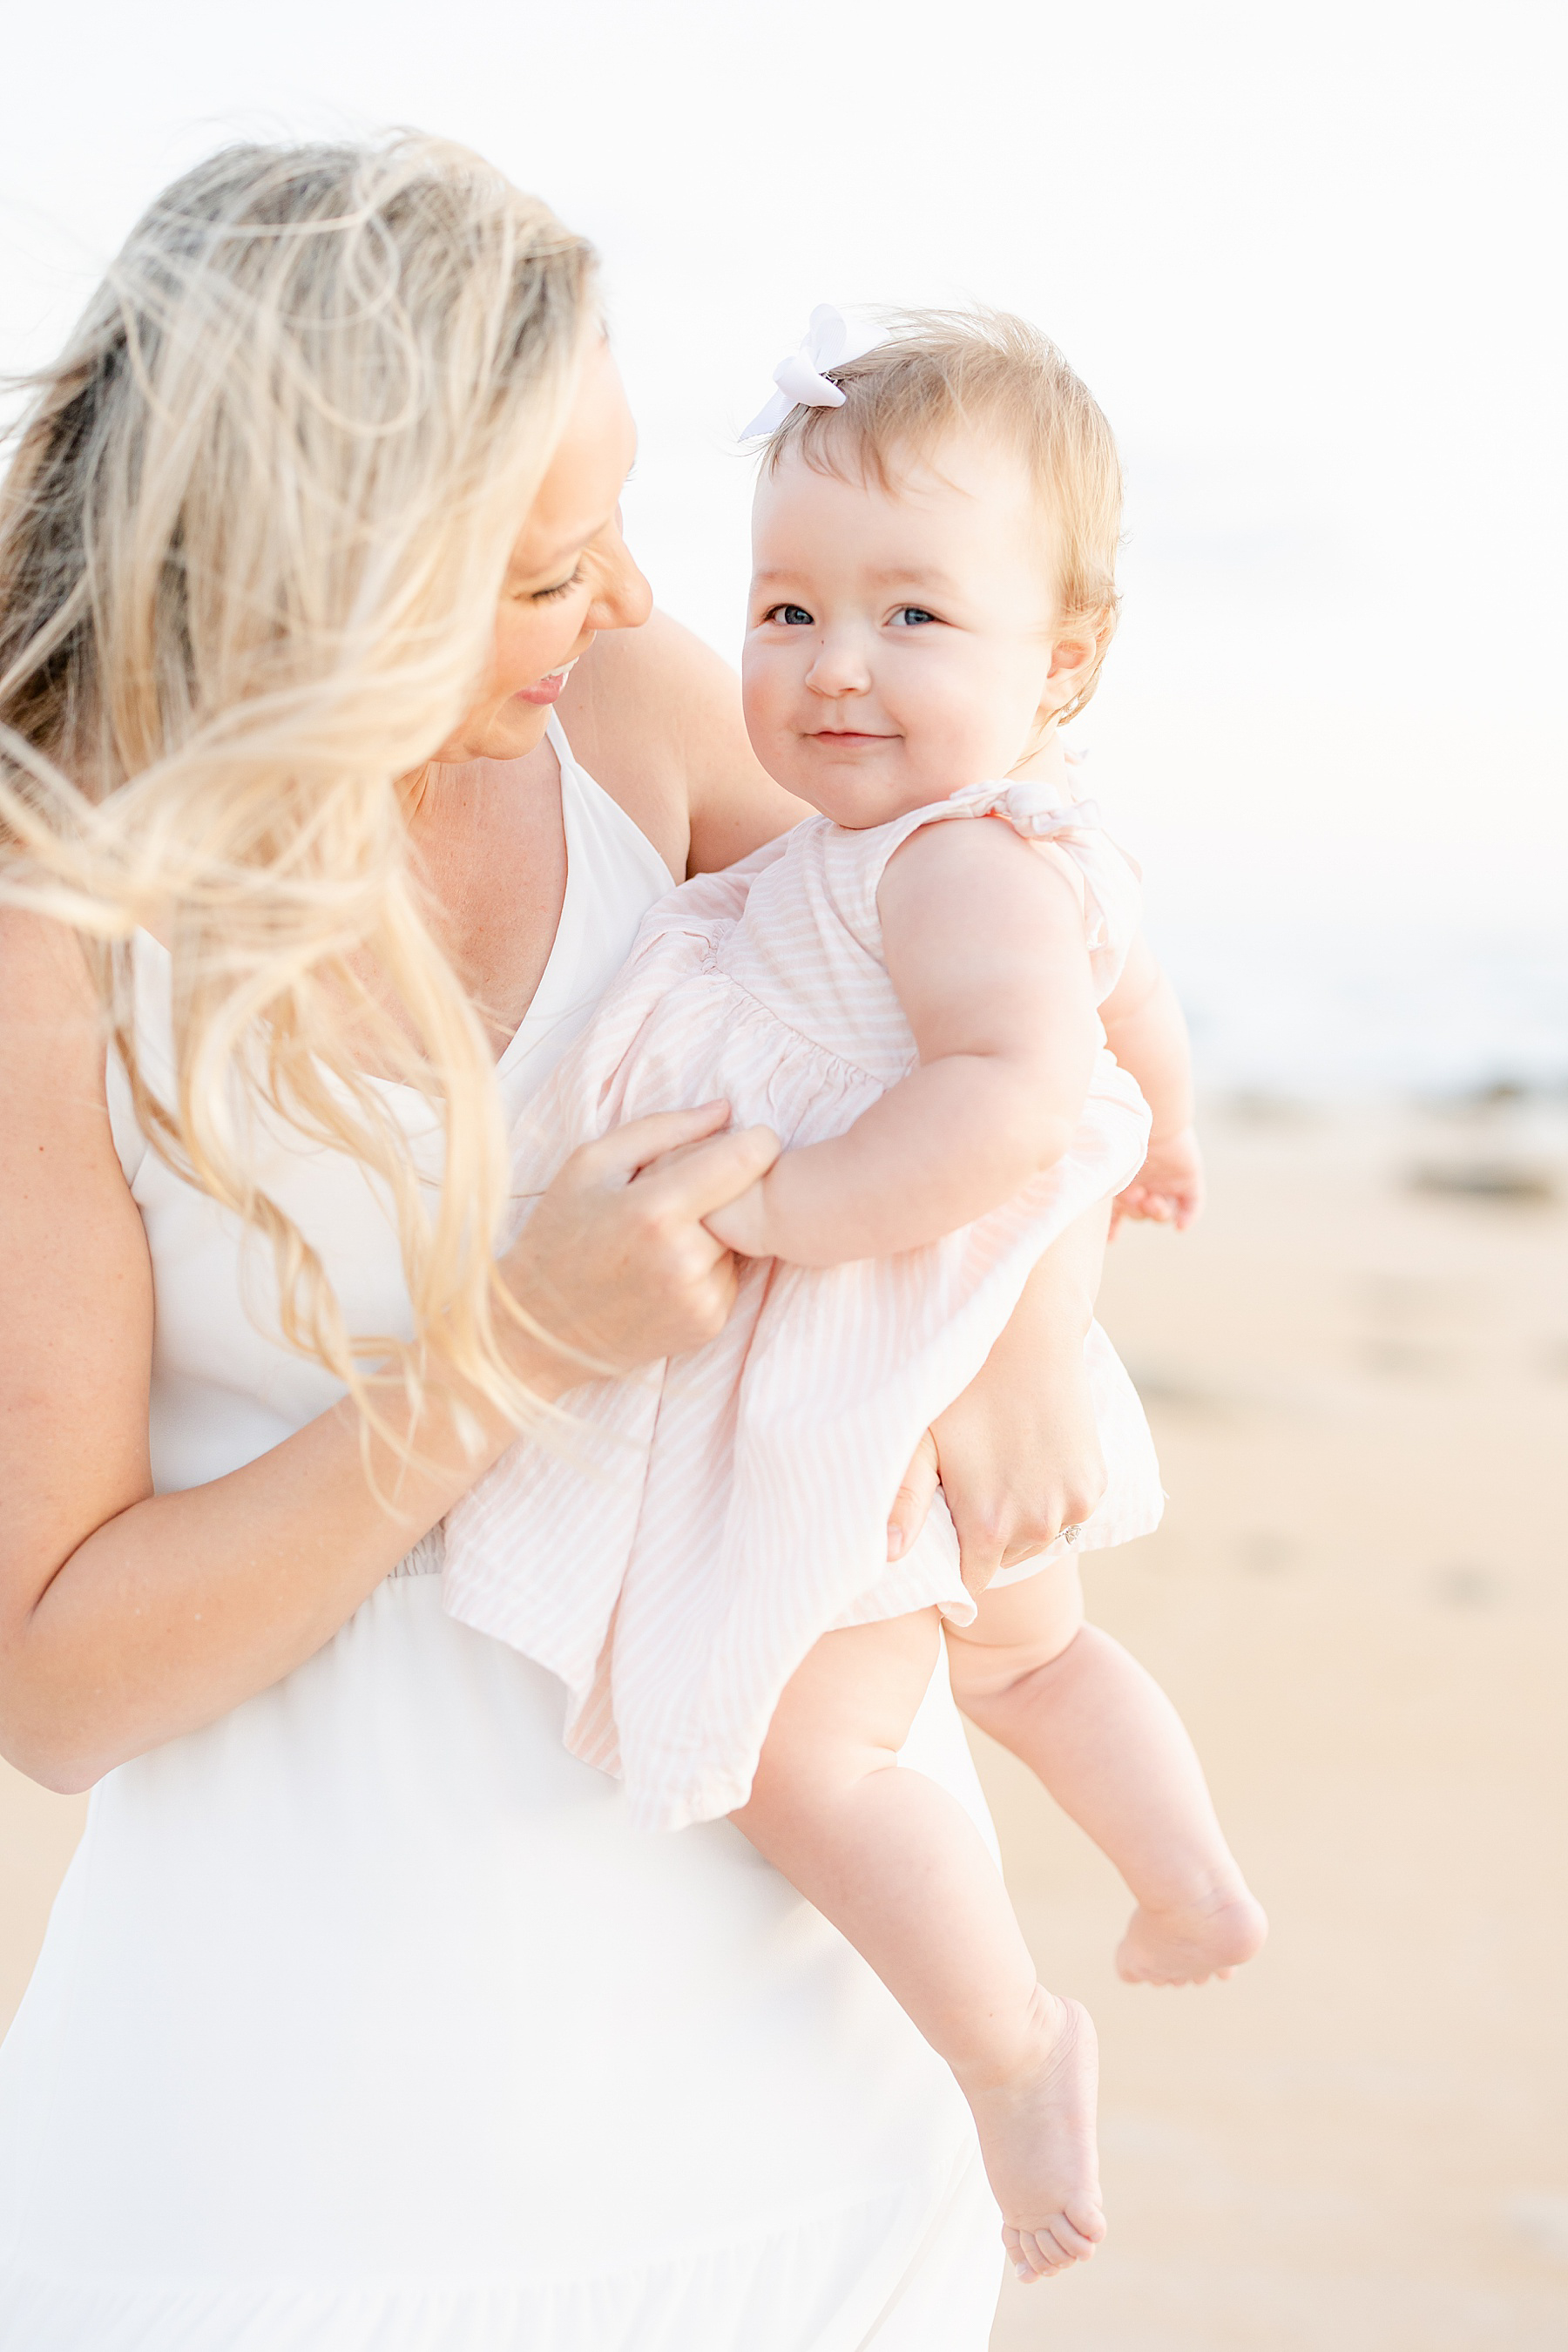 baby girl pink striped dress sunrise beach photo woman with blonde hair holding baby girl